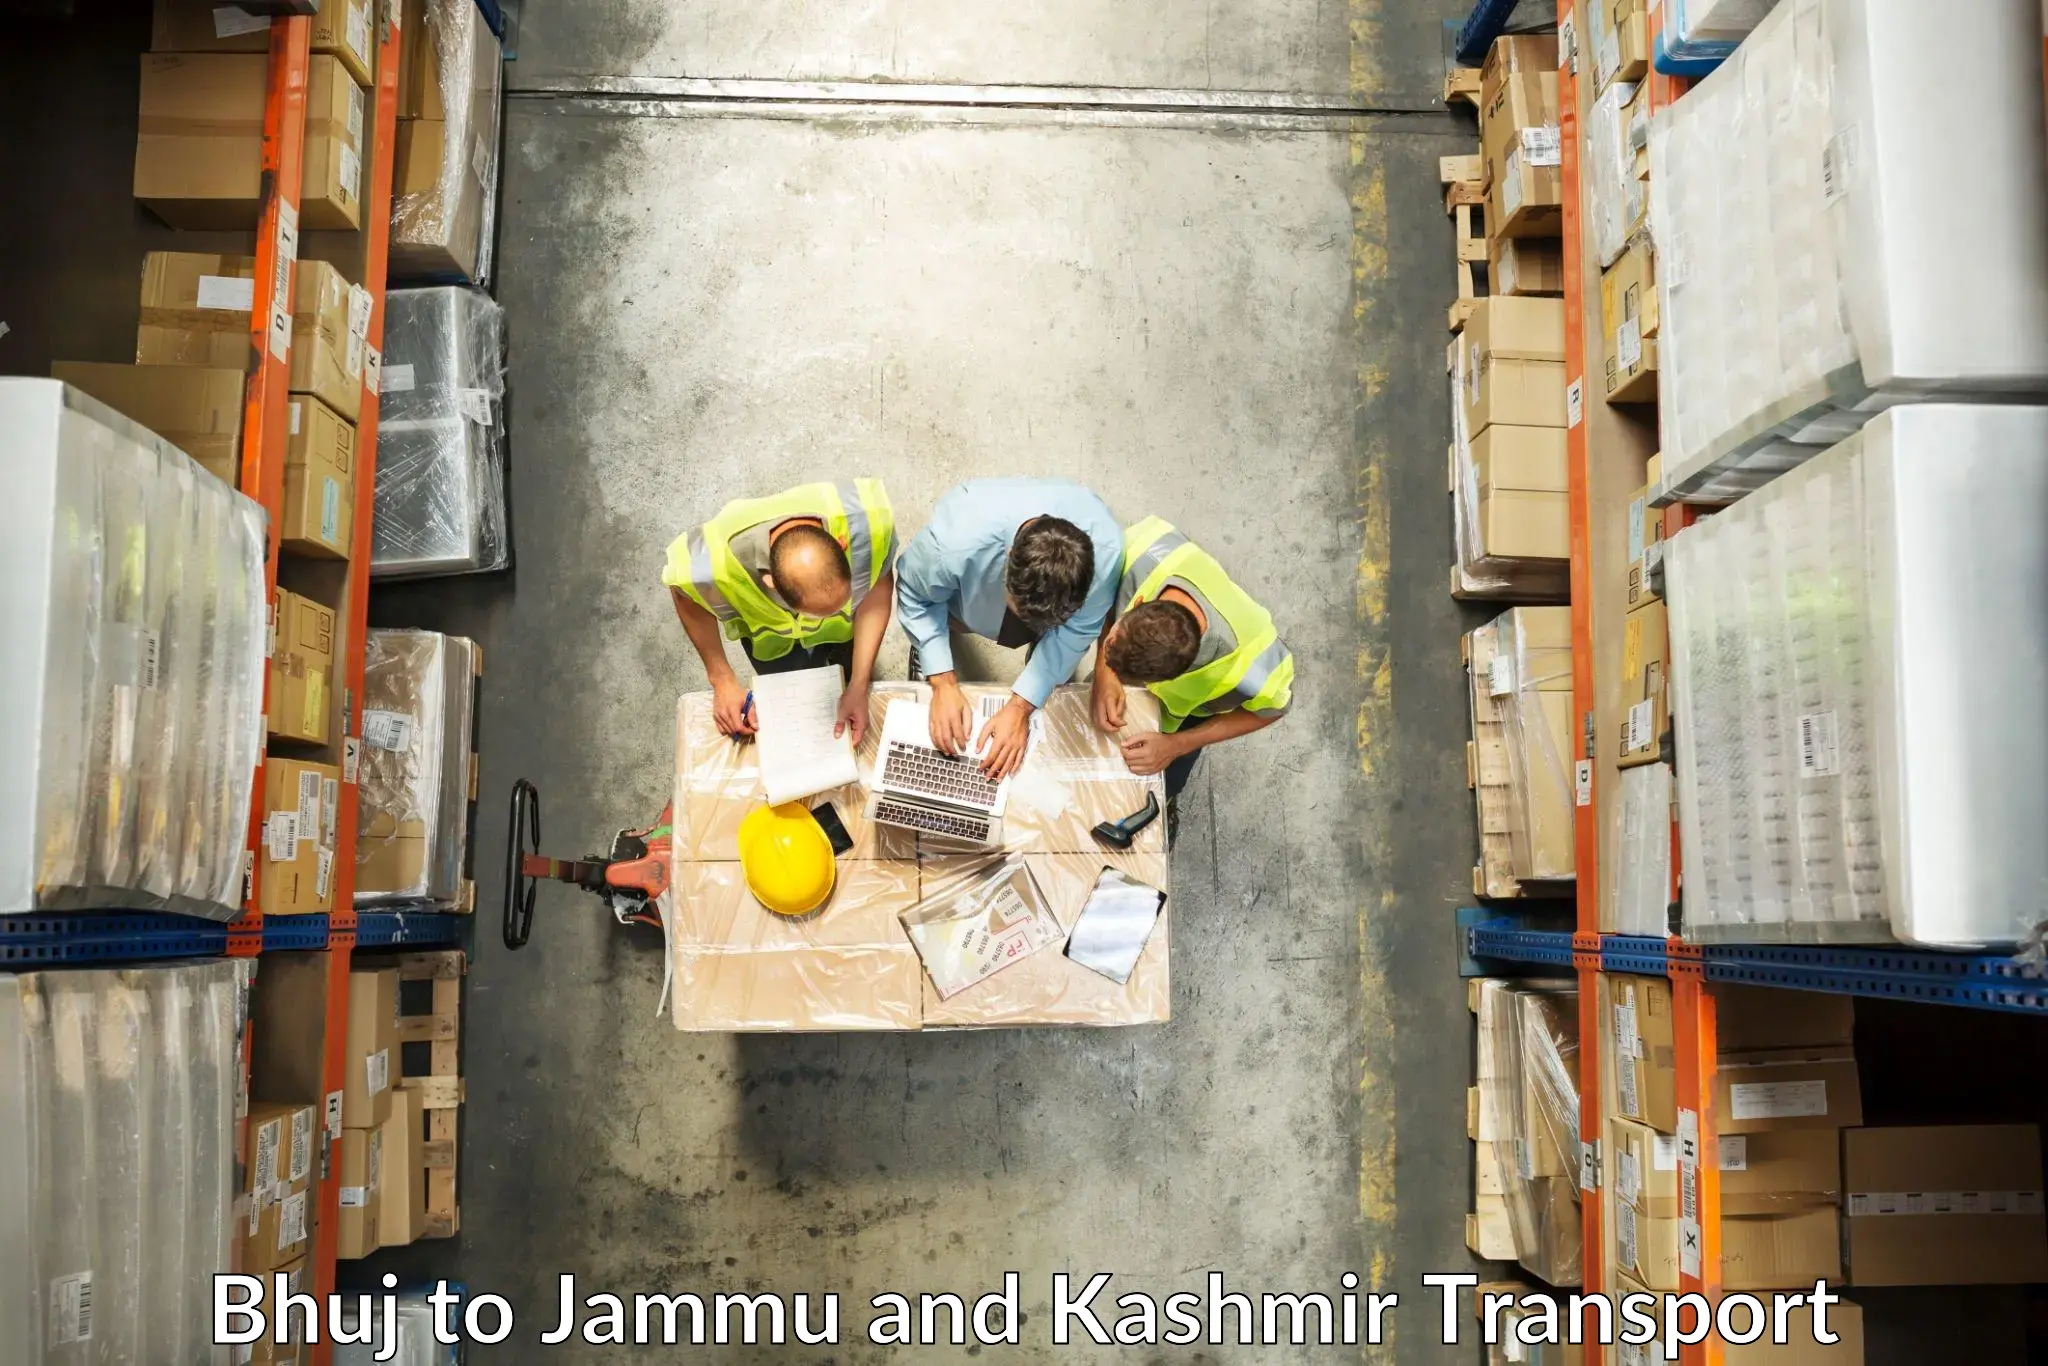 Truck transport companies in India Bhuj to Jammu and Kashmir